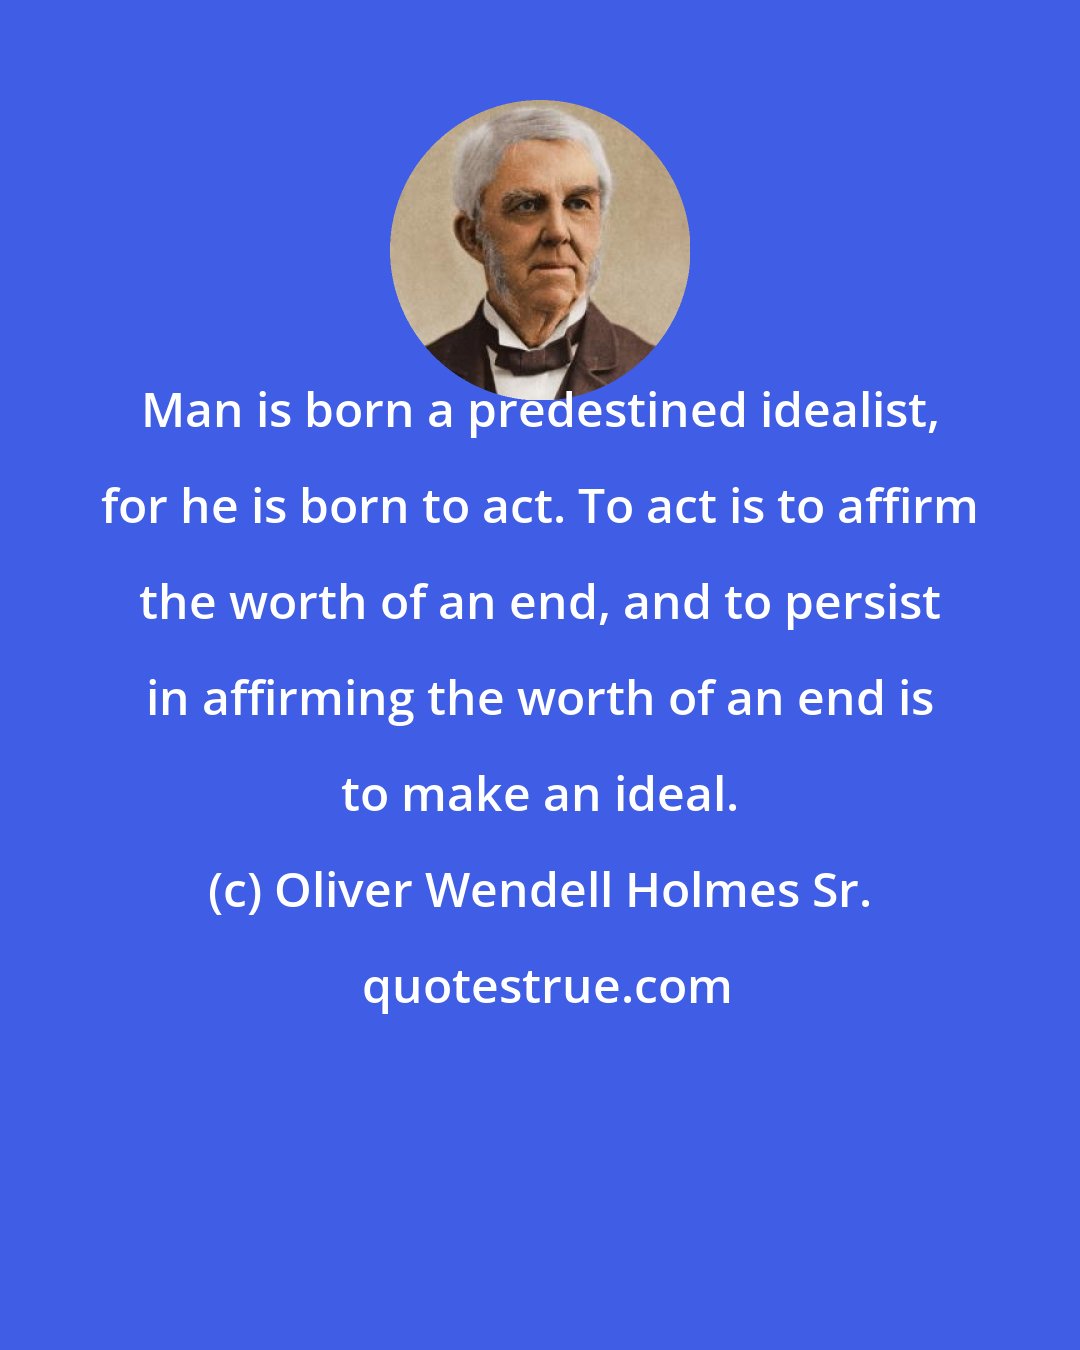 Oliver Wendell Holmes Sr.: Man is born a predestined idealist, for he is born to act. To act is to affirm the worth of an end, and to persist in affirming the worth of an end is to make an ideal.